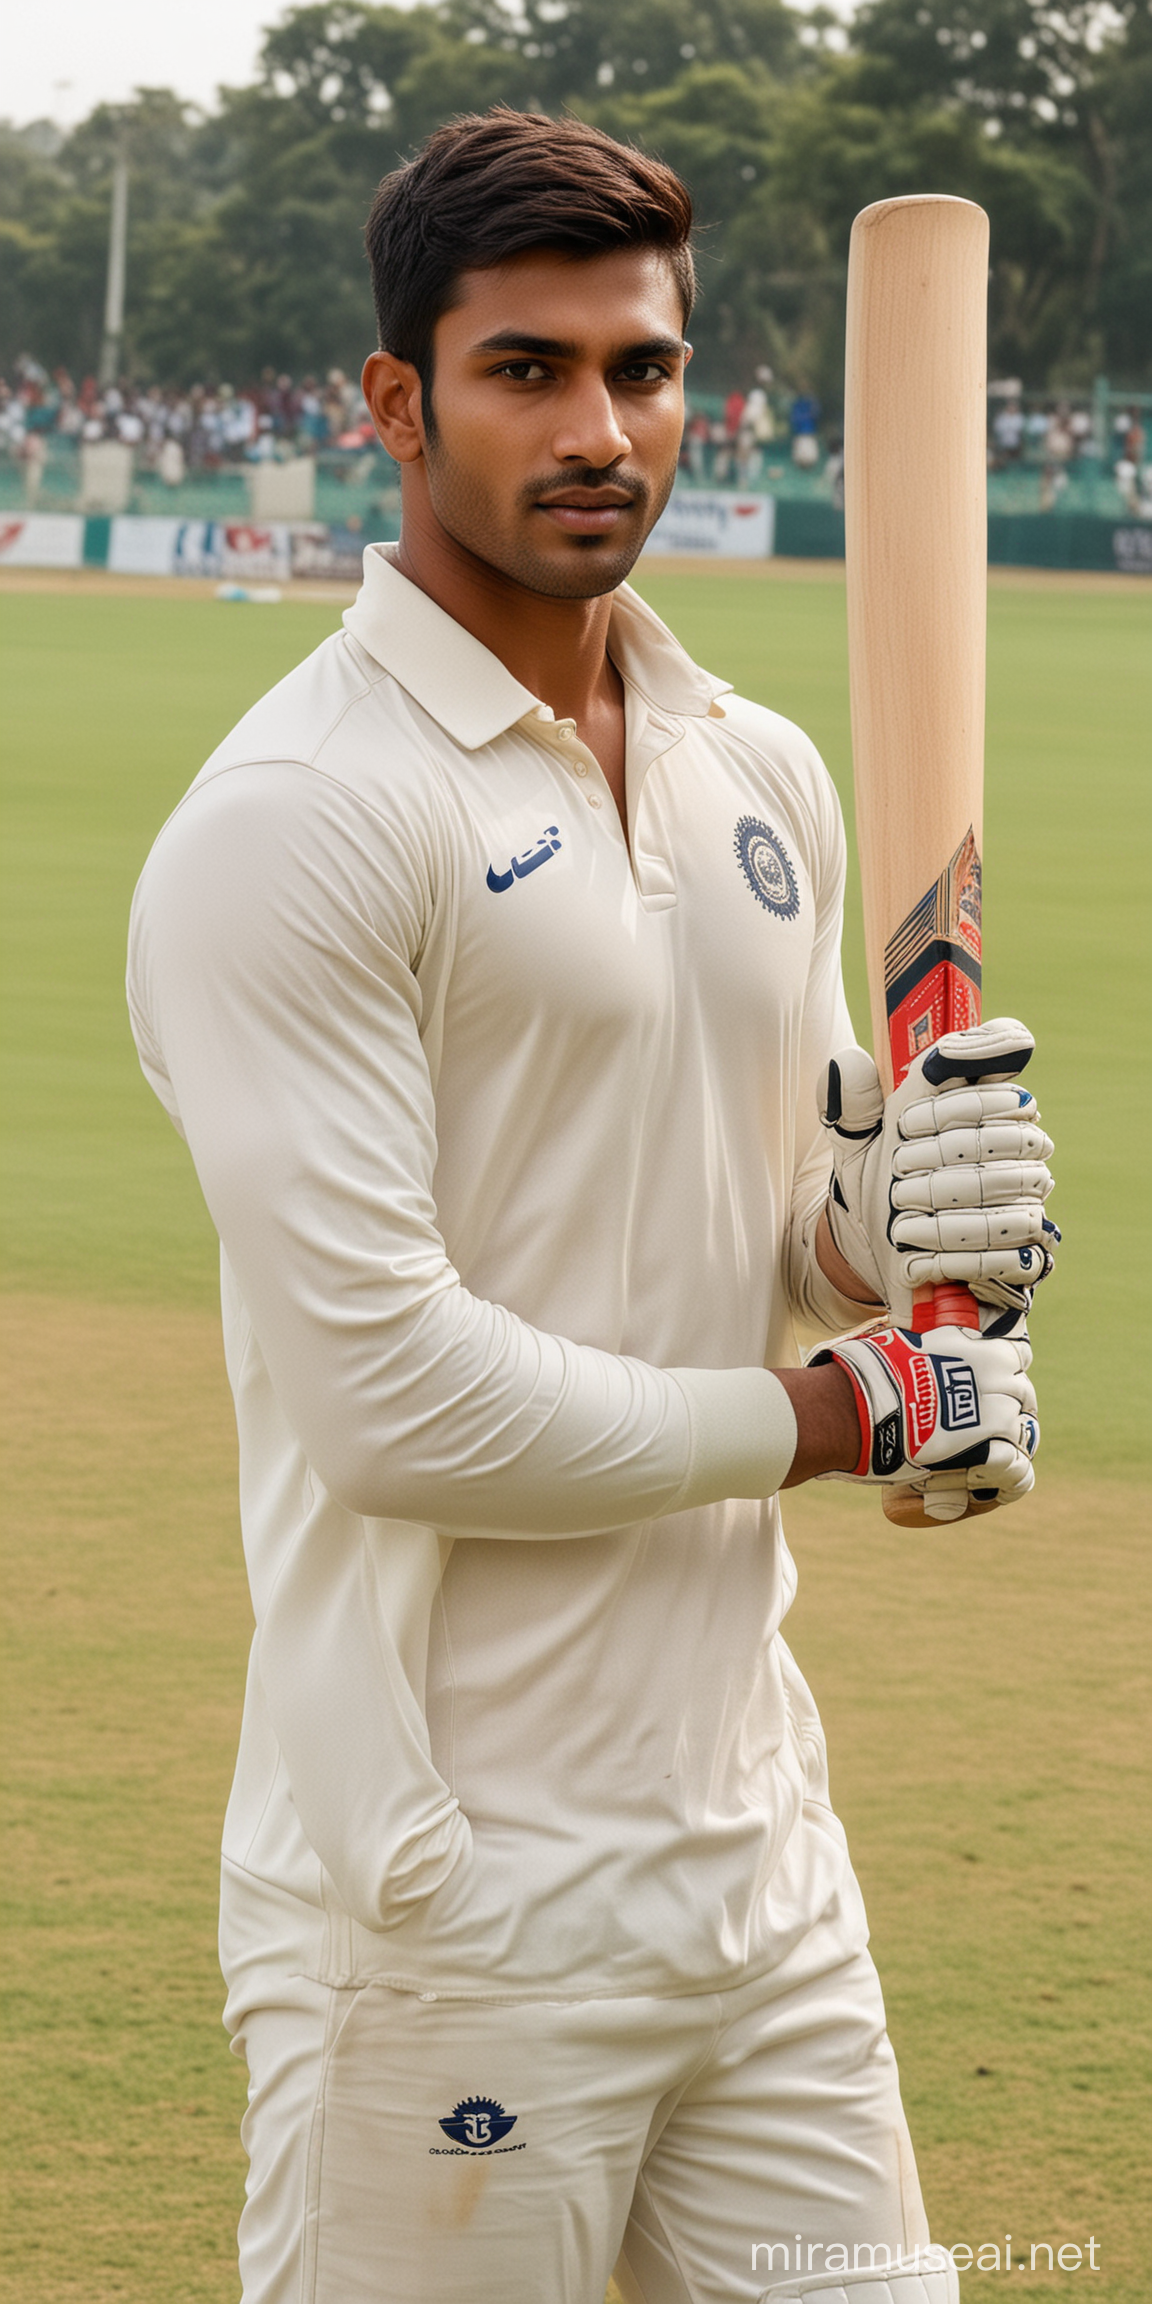 Indian Heavenly handsome young jock sportsman, hot, handsome, sexy, stunning features, muscular, playing cricket,wearing tight tight cricket uniform, pads, gloves,holding a bat, background of cricket field.